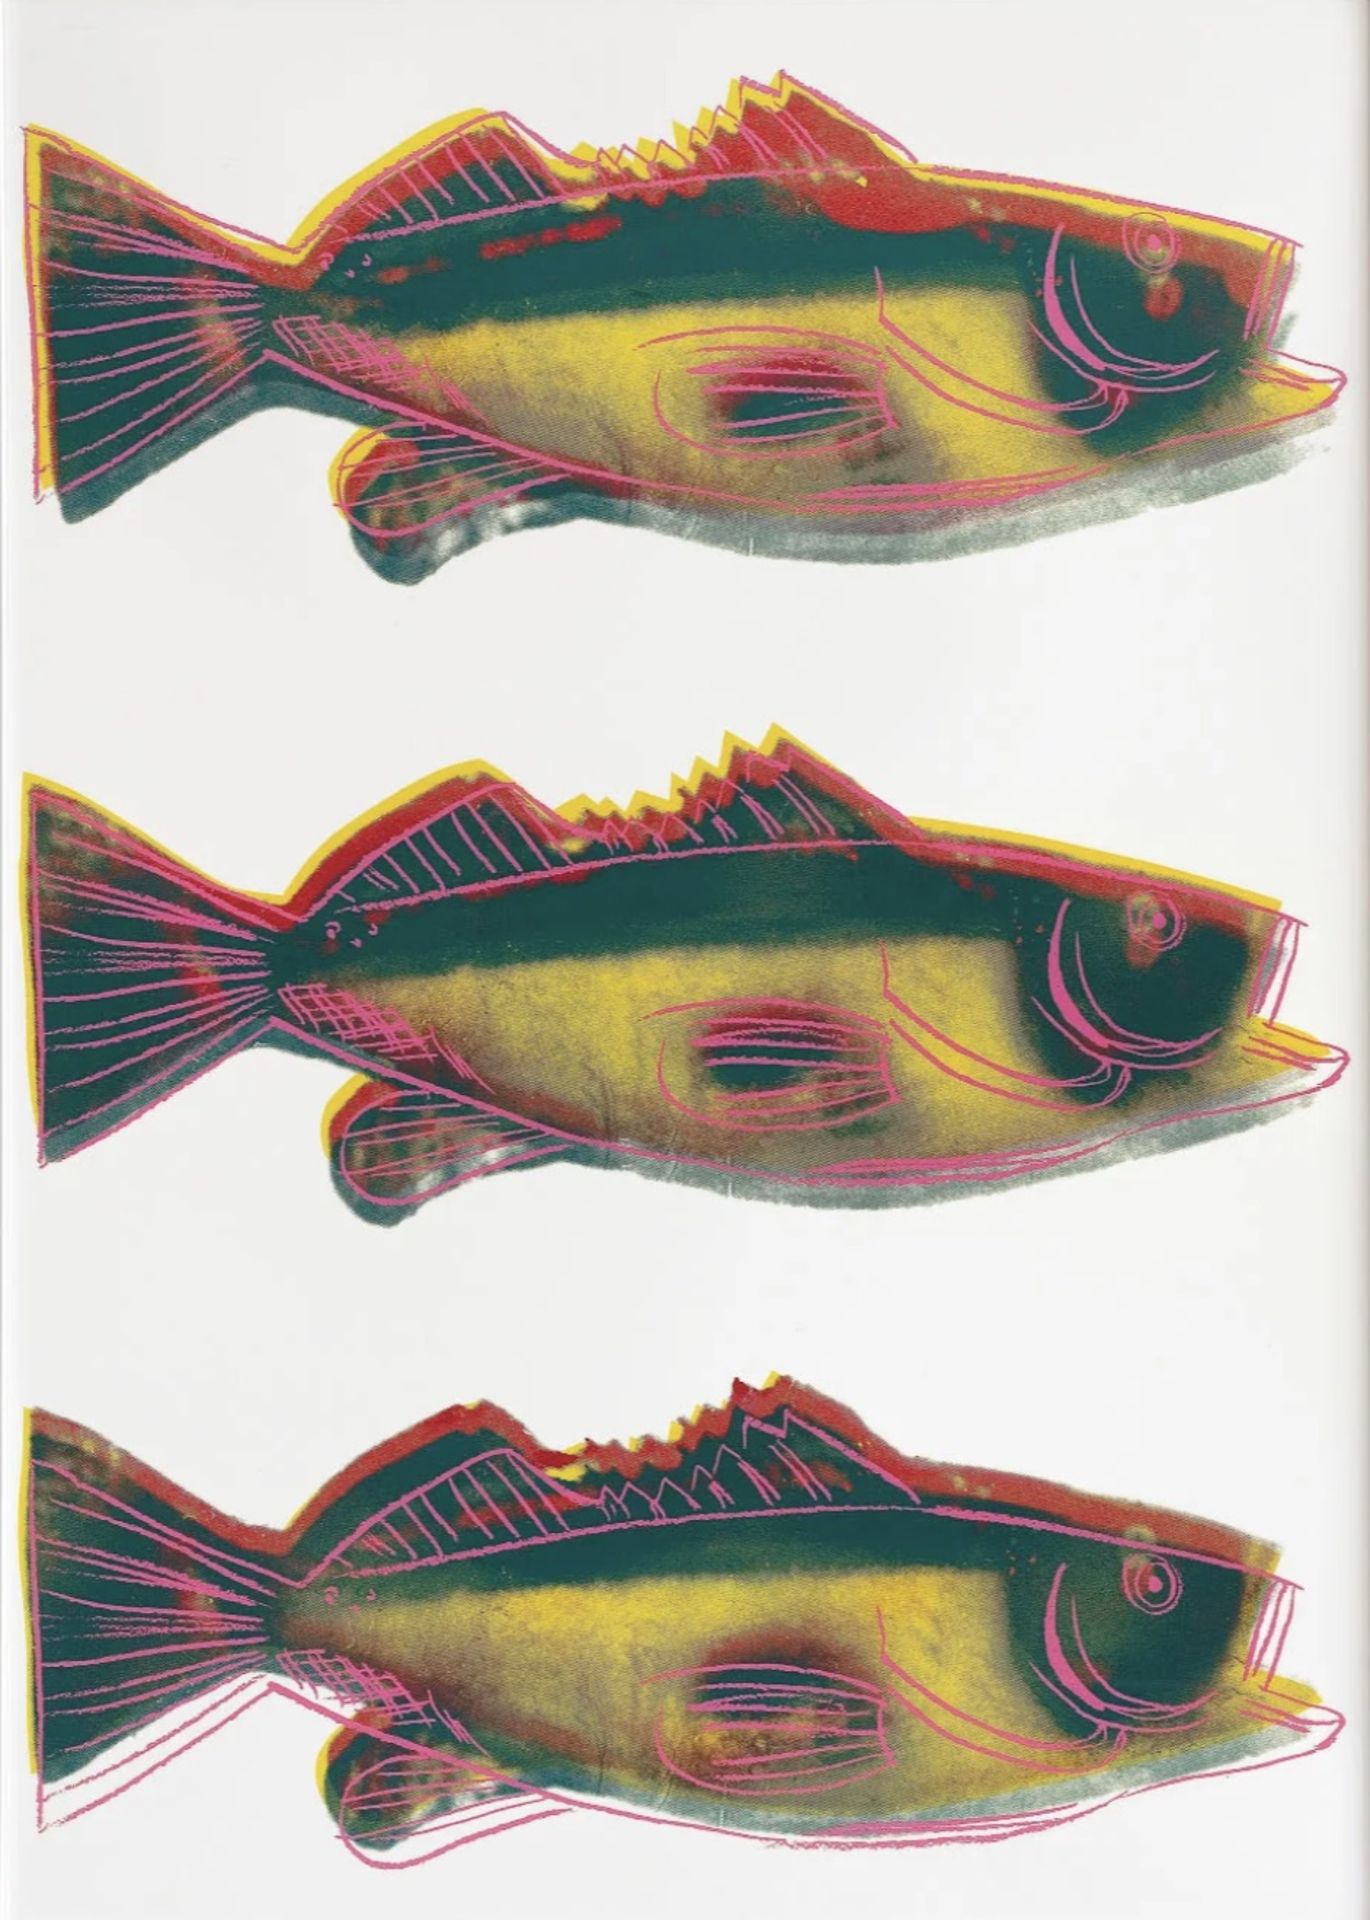 Andy Warhol "Triple Fish" Offset Lithograph